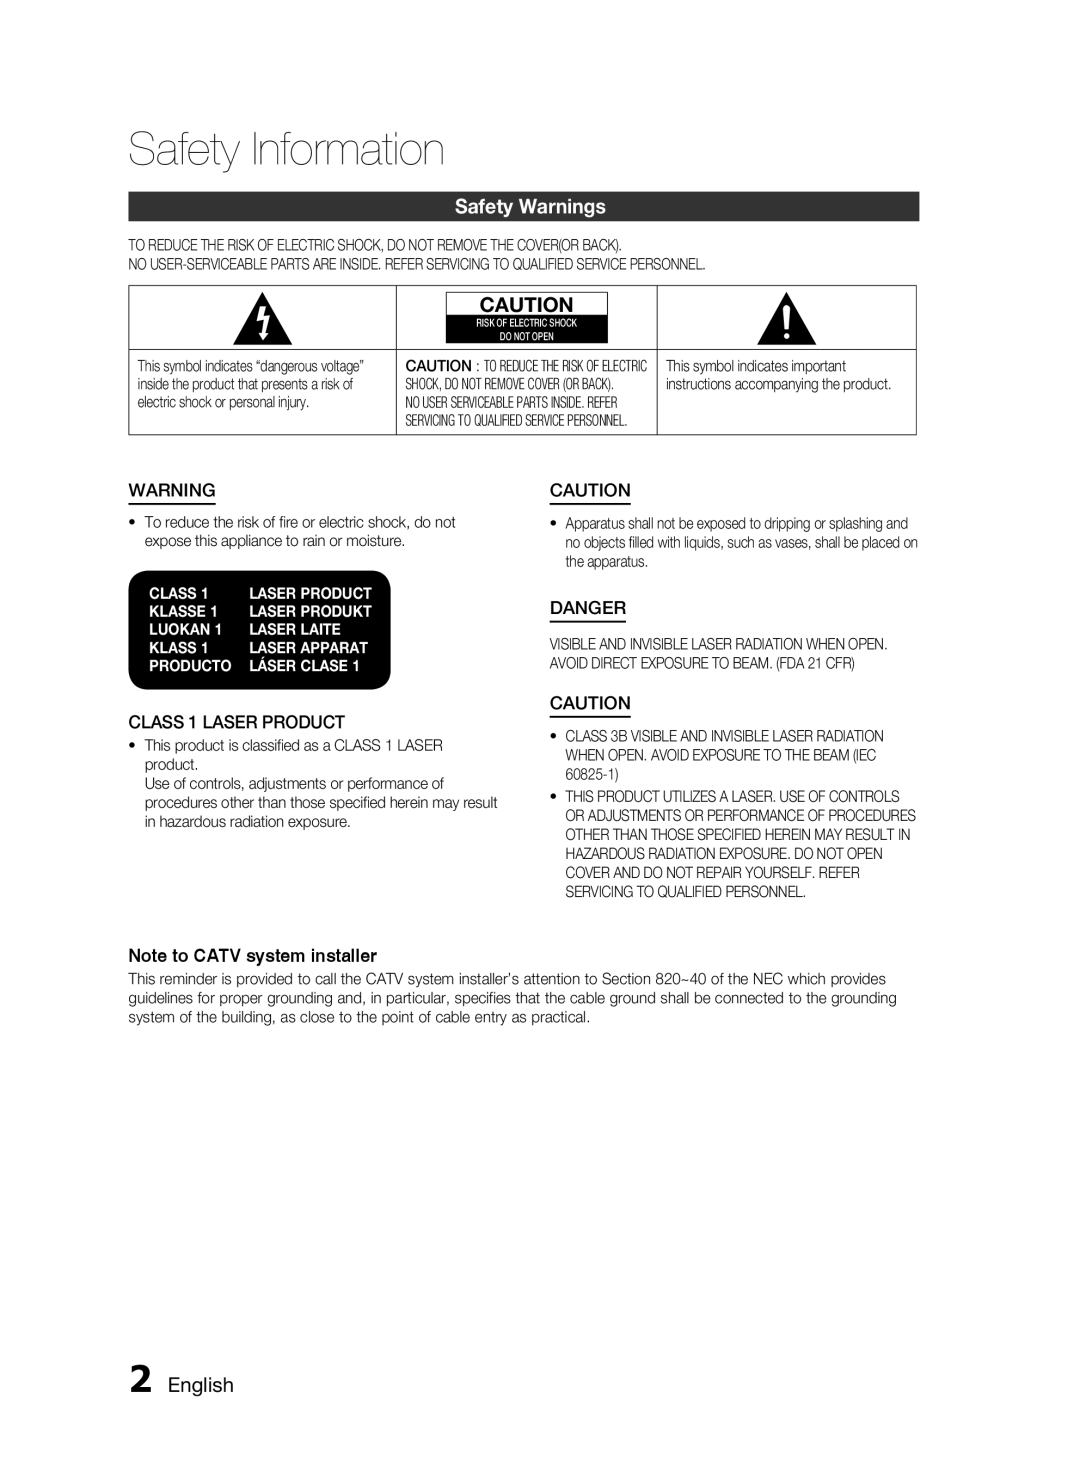 Samsung AH68-02290S Safety Information, Safety Warnings, English, Note to CATV system installer, Class, Klasse, Luokan 